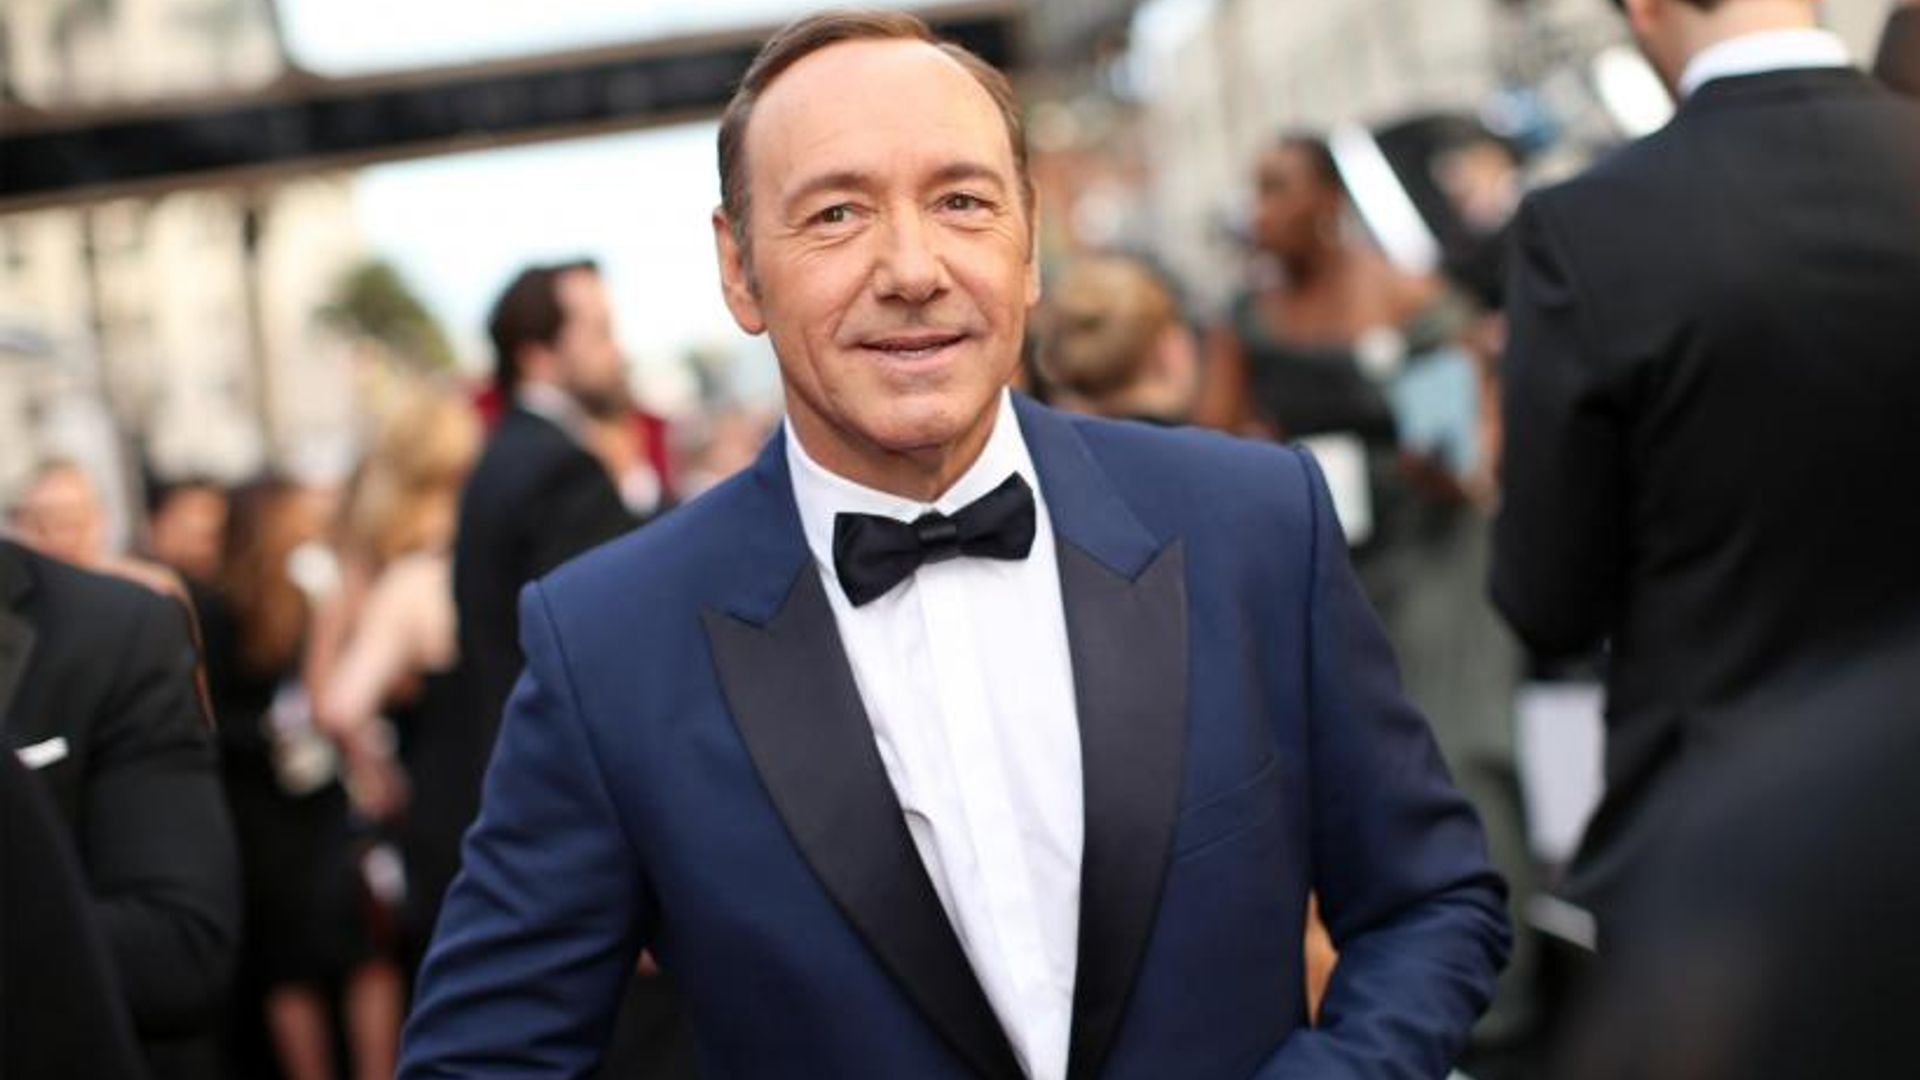 Kevin Spacey to be replaced in a completed film